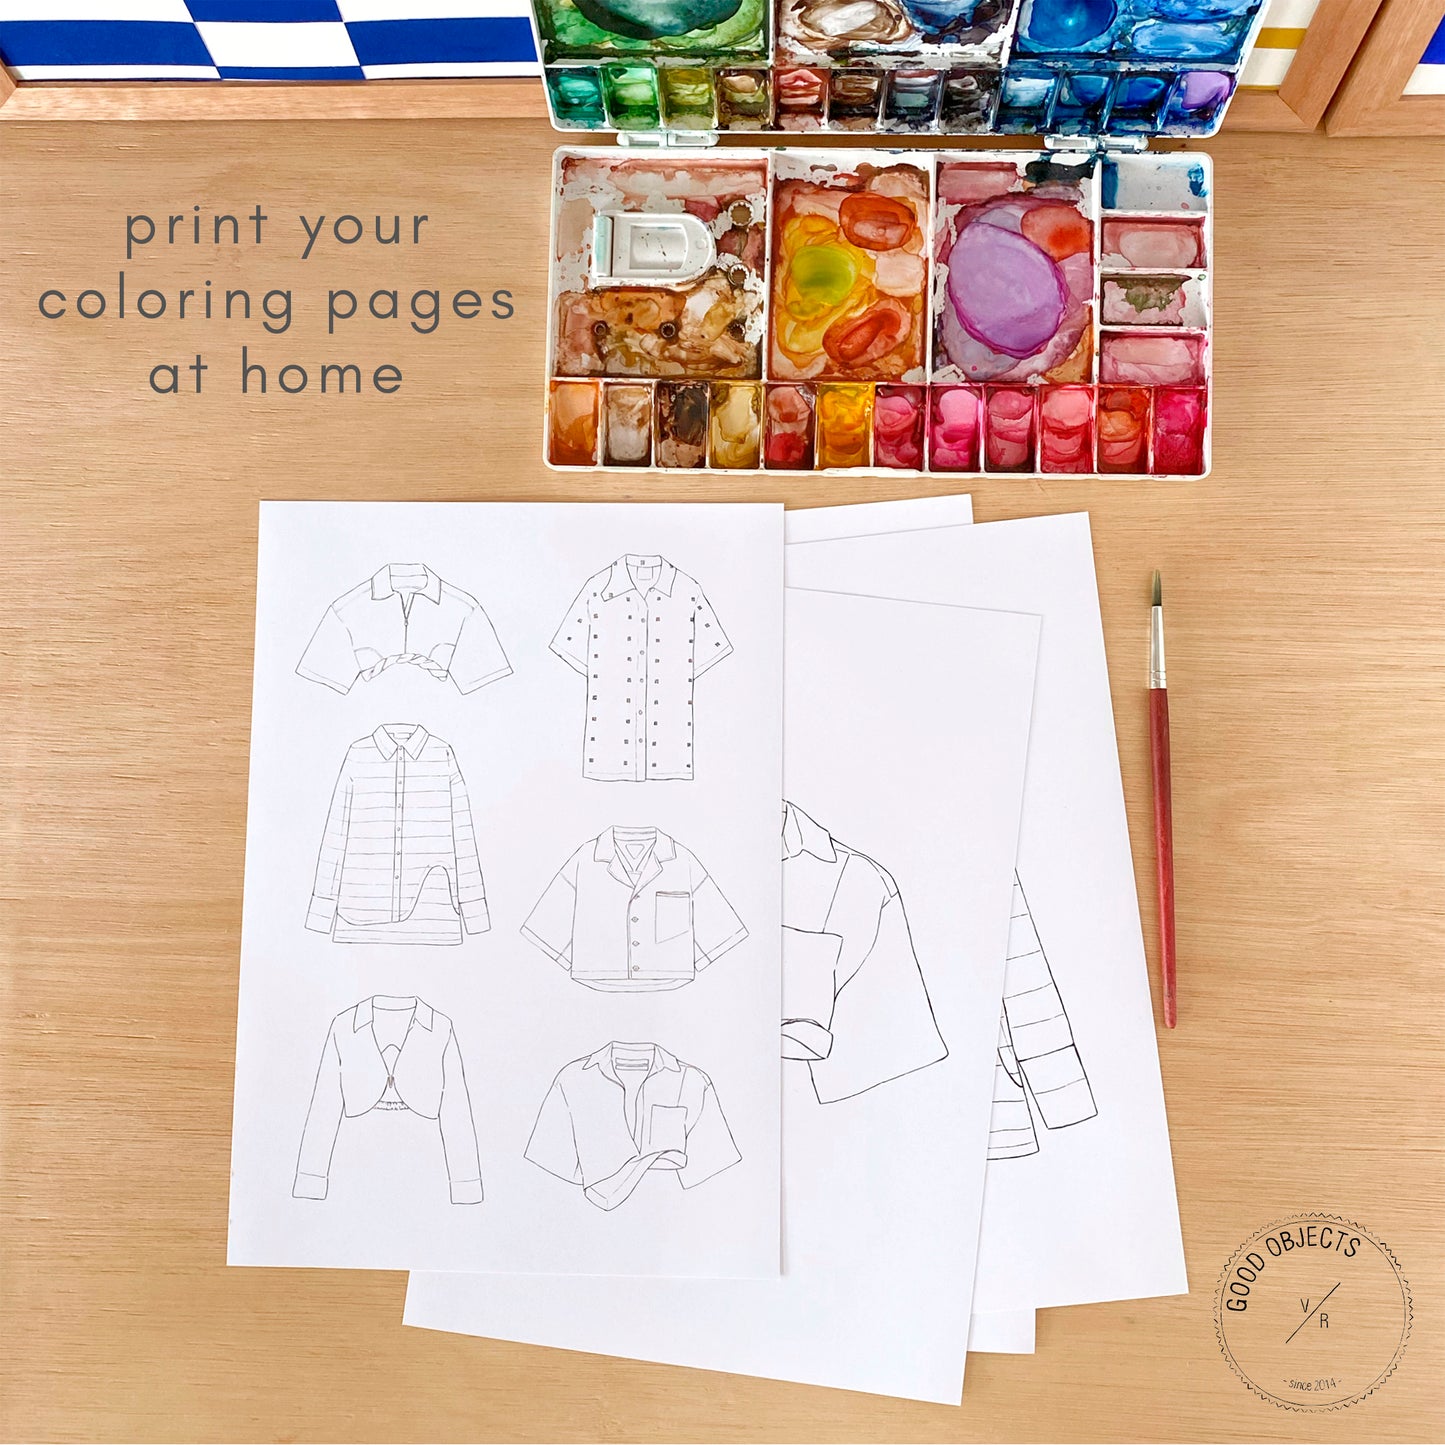 print your coloring pages at home